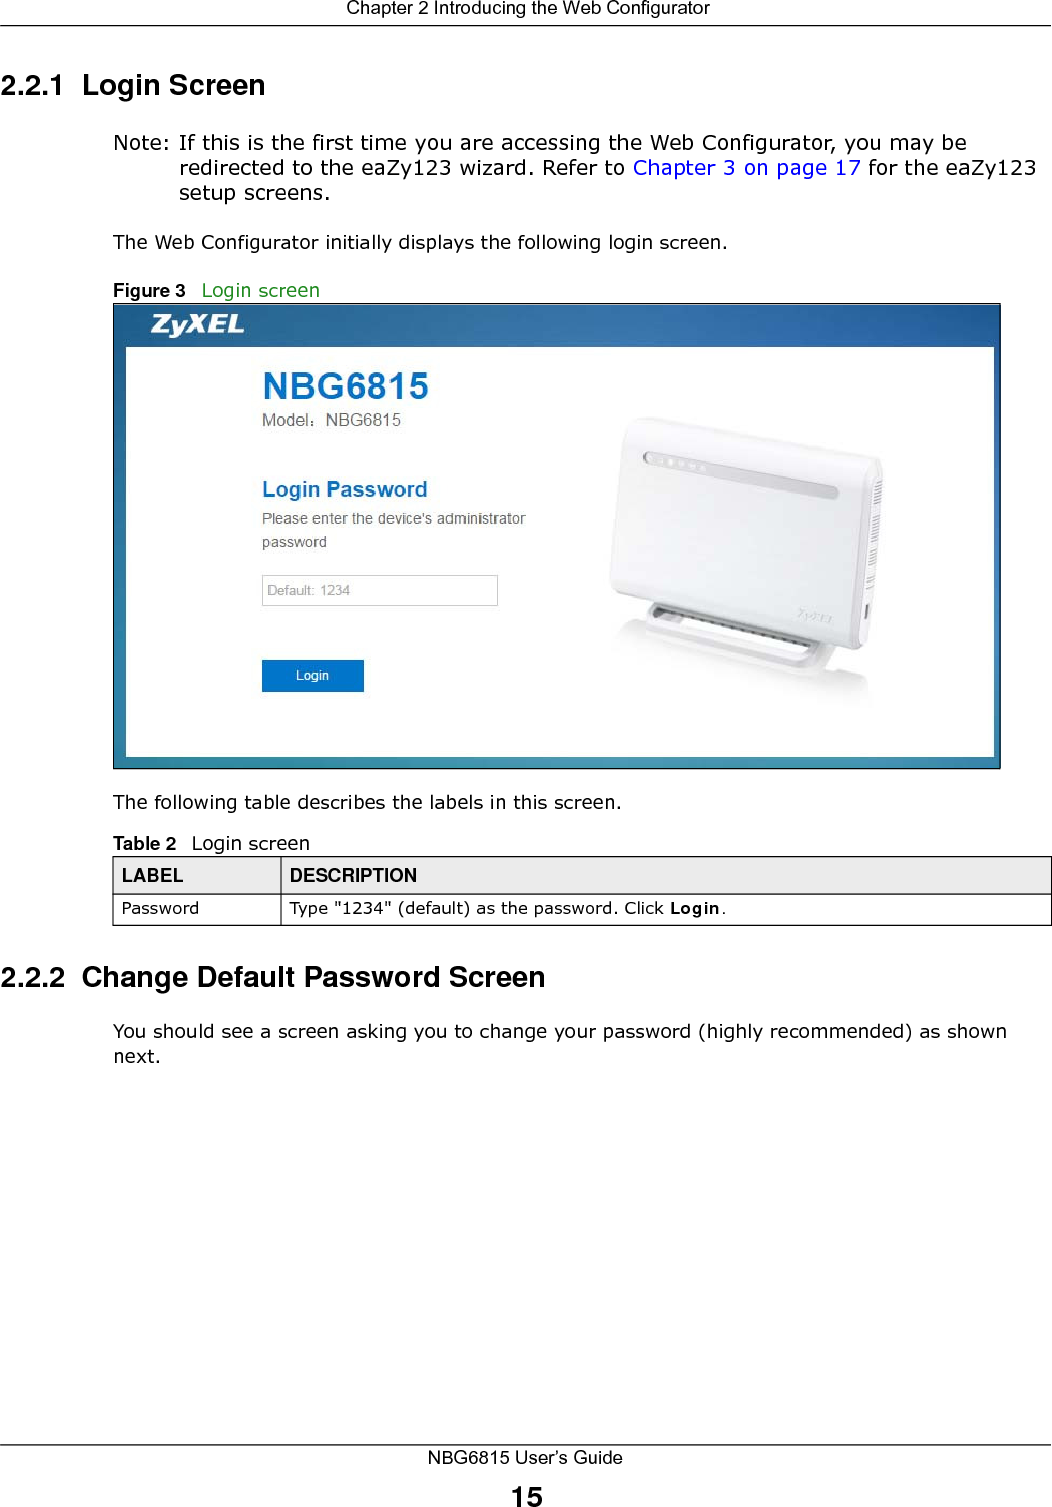  Chapter 2 Introducing the Web ConfiguratorNBG6815 User’s Guide152.2.1  Login ScreenNote: If this is the first time you are accessing the Web Configurator, you may be redirected to the eaZy123 wizard. Refer to Chapter 3 on page 17 for the eaZy123 setup screens. The Web Configurator initially displays the following login screen.Figure 3   Login screenThe following table describes the labels in this screen.2.2.2  Change Default Password ScreenYou should see a screen asking you to change your password (highly recommended) as shown next. Table 2   Login screenLABEL DESCRIPTIONPassword Type &quot;1234&quot; (default) as the password. Click Login.